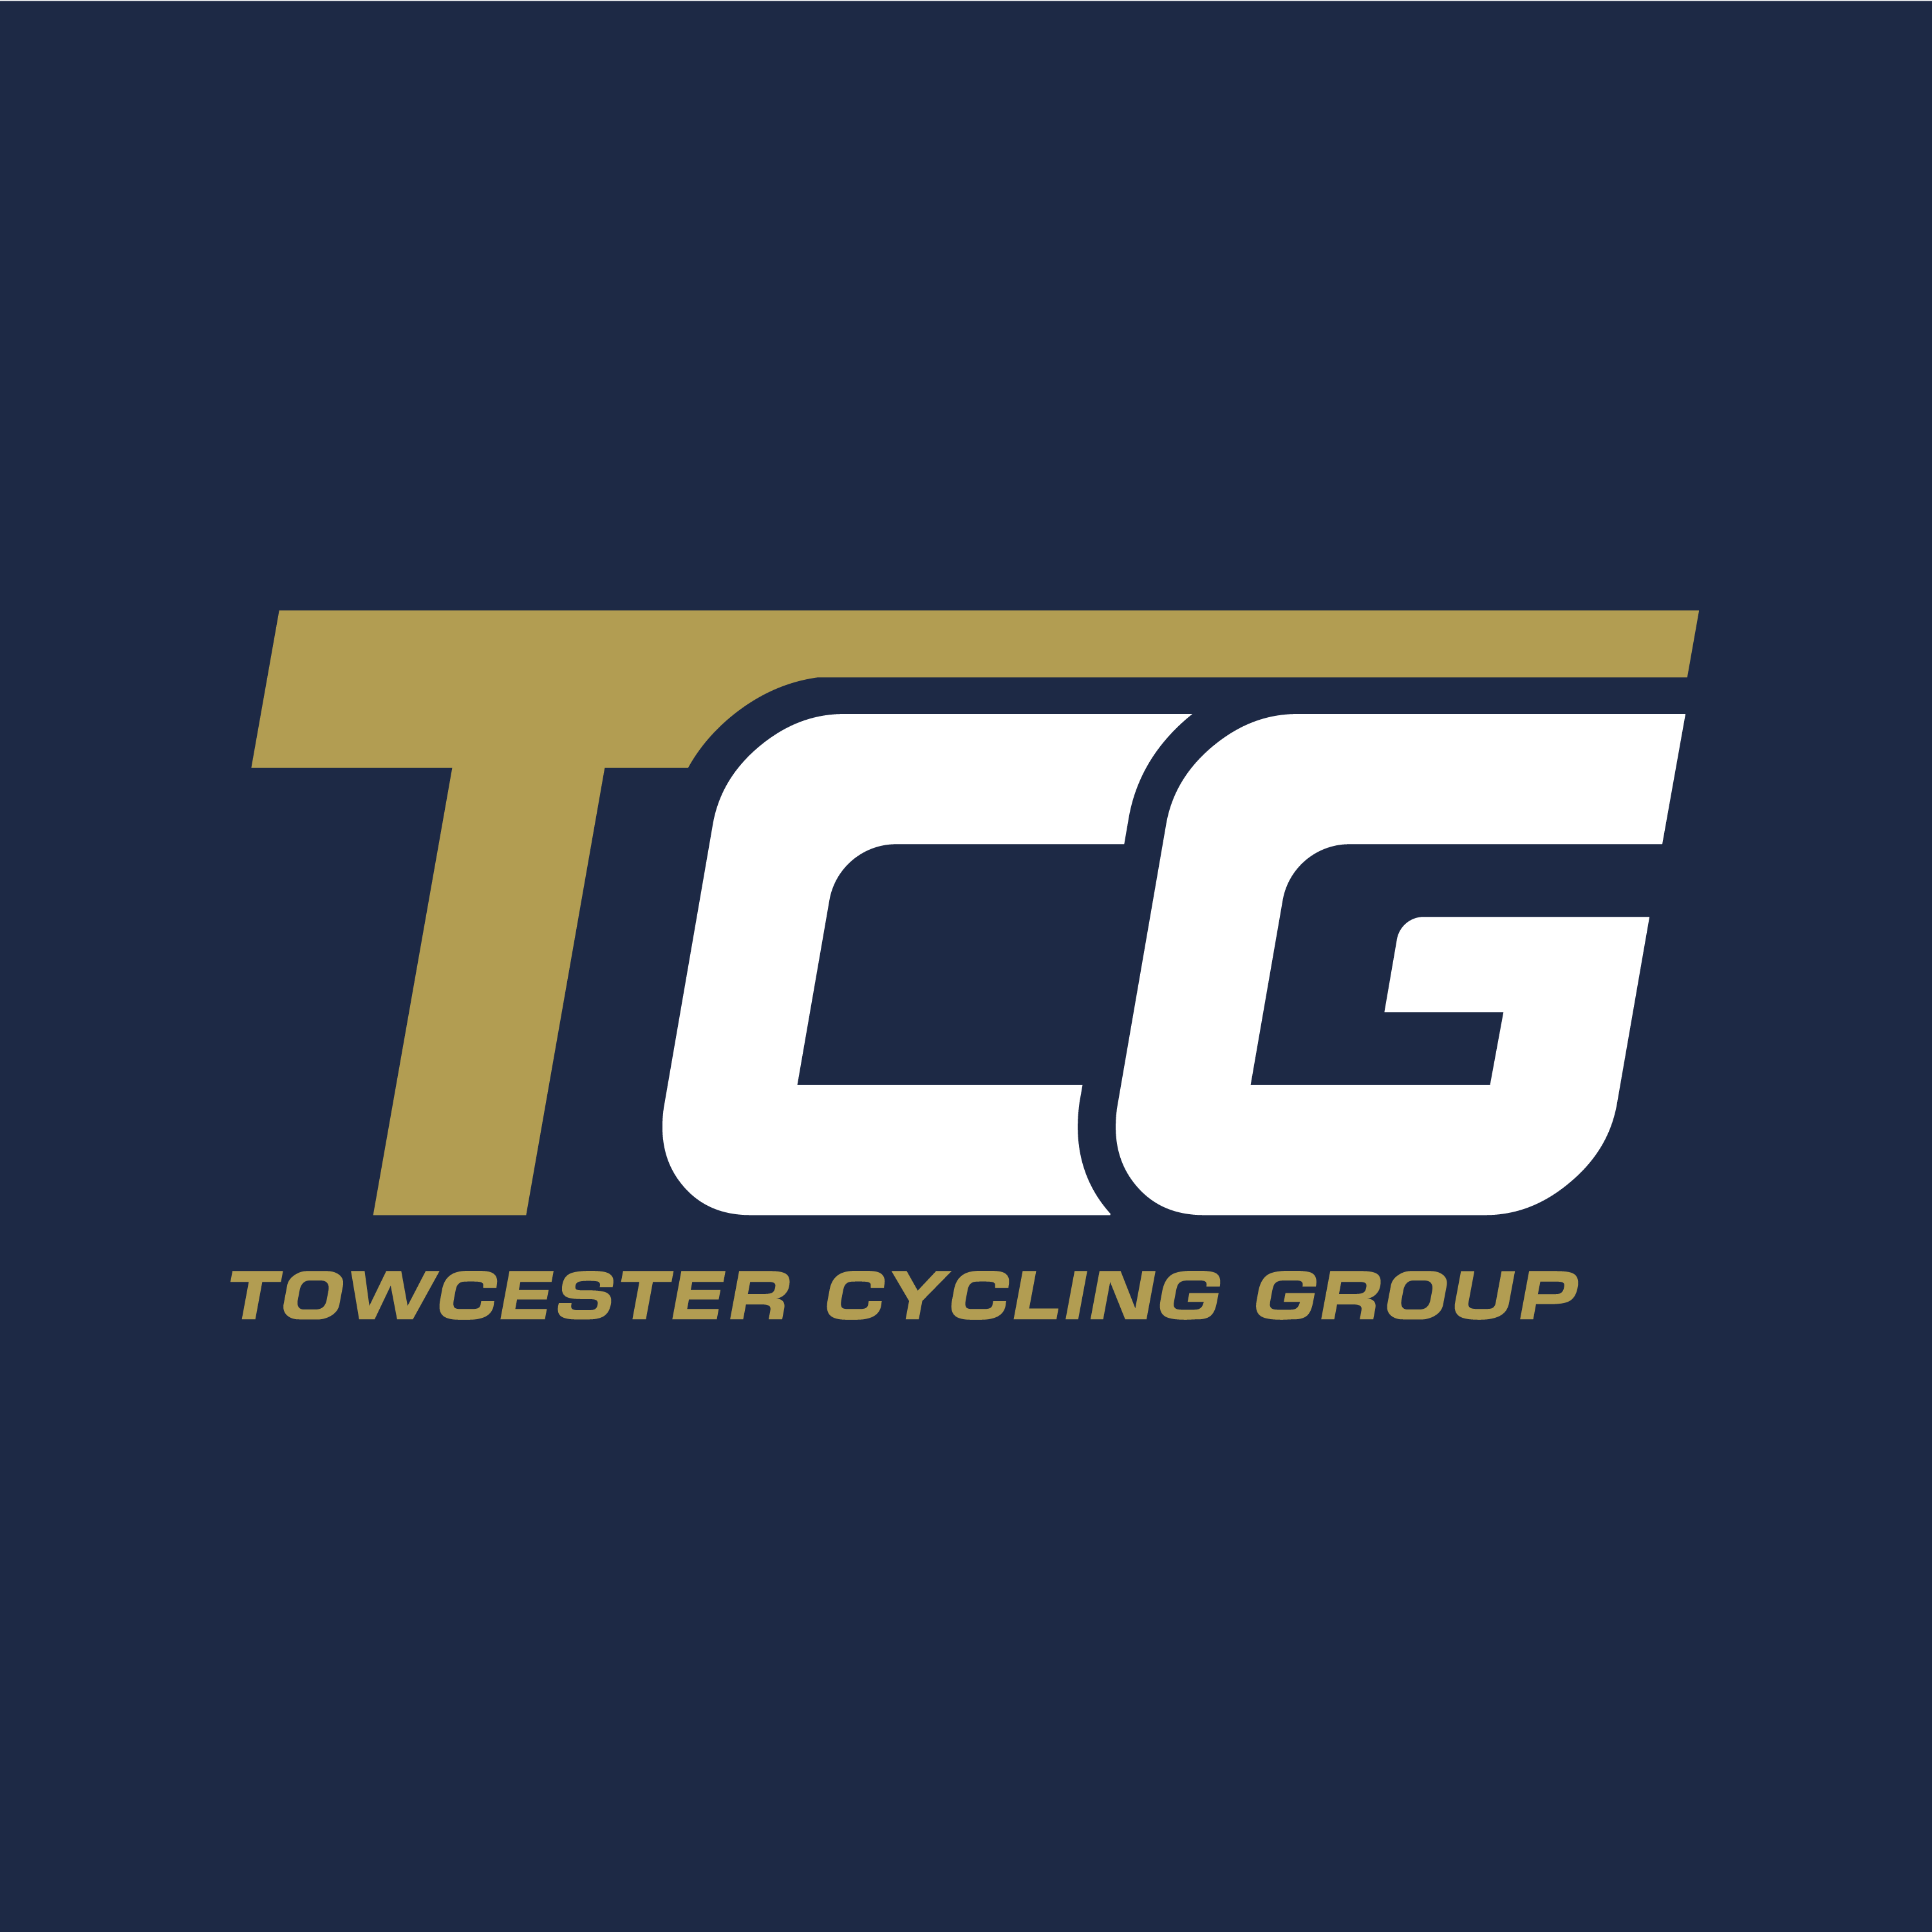 Club Image for TOWCESTER CYCLING GROUP